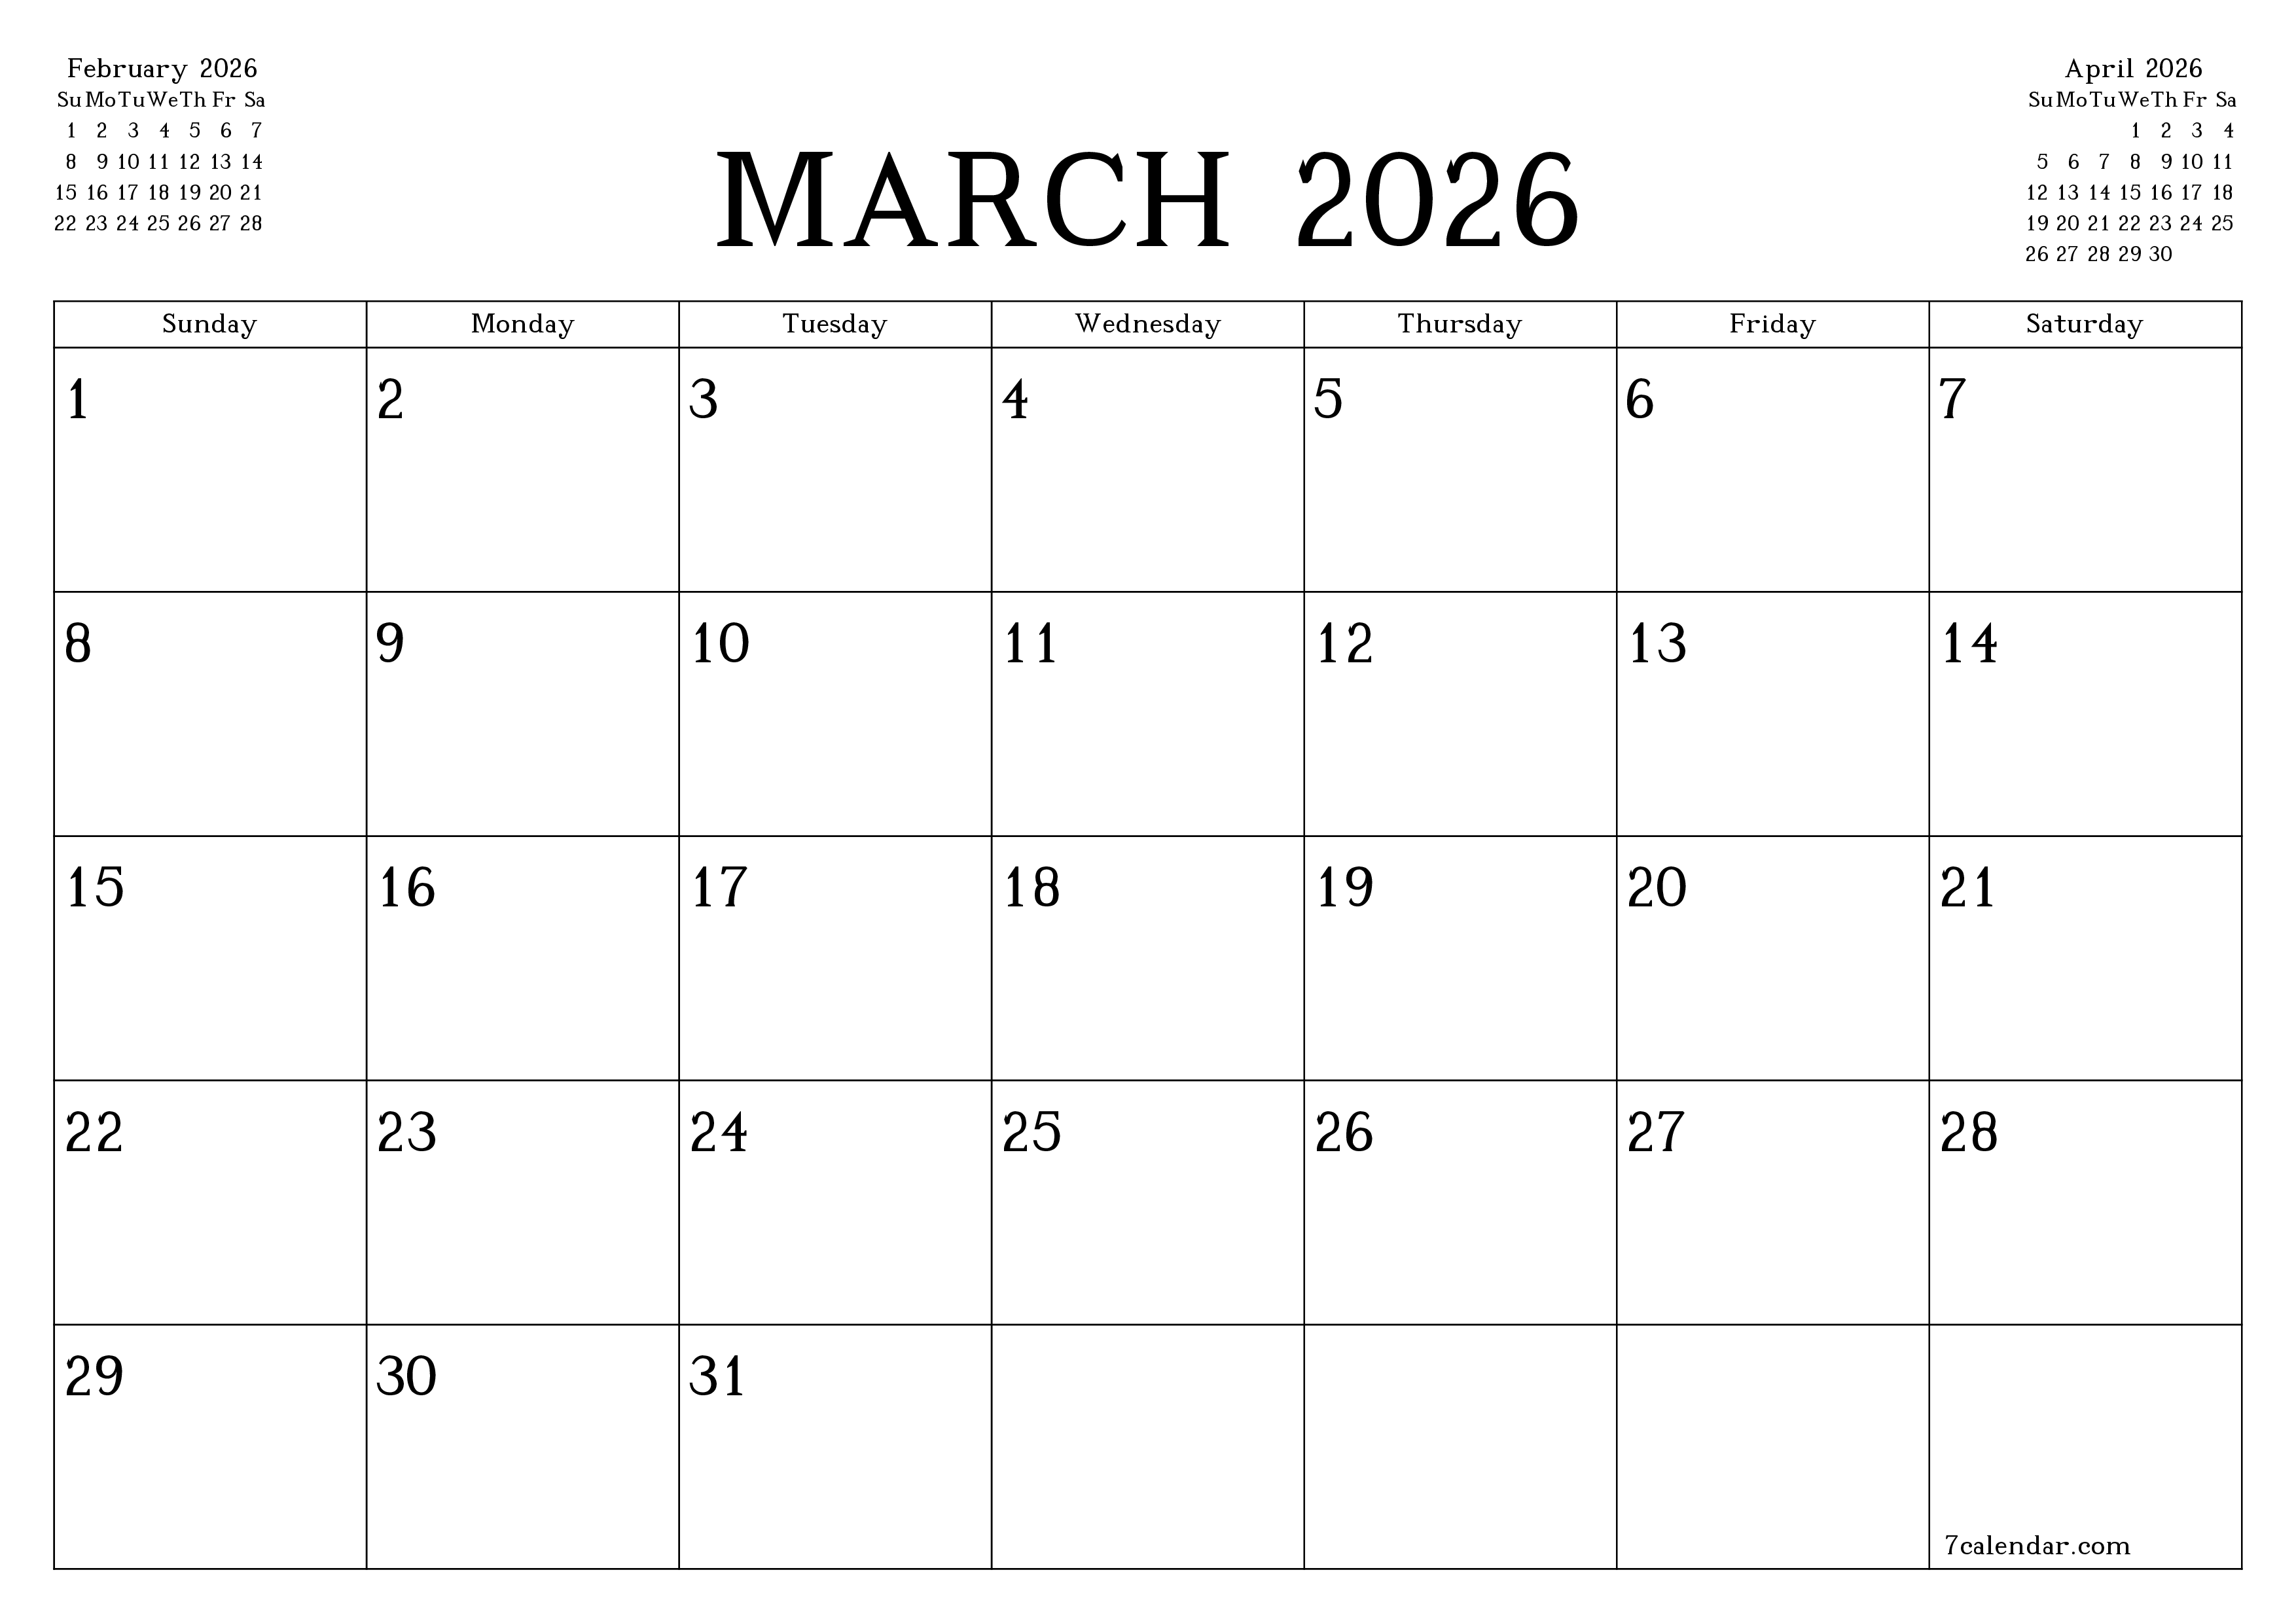 printable wall template free horizontal Monthly planner calendar March (Mar) 2026